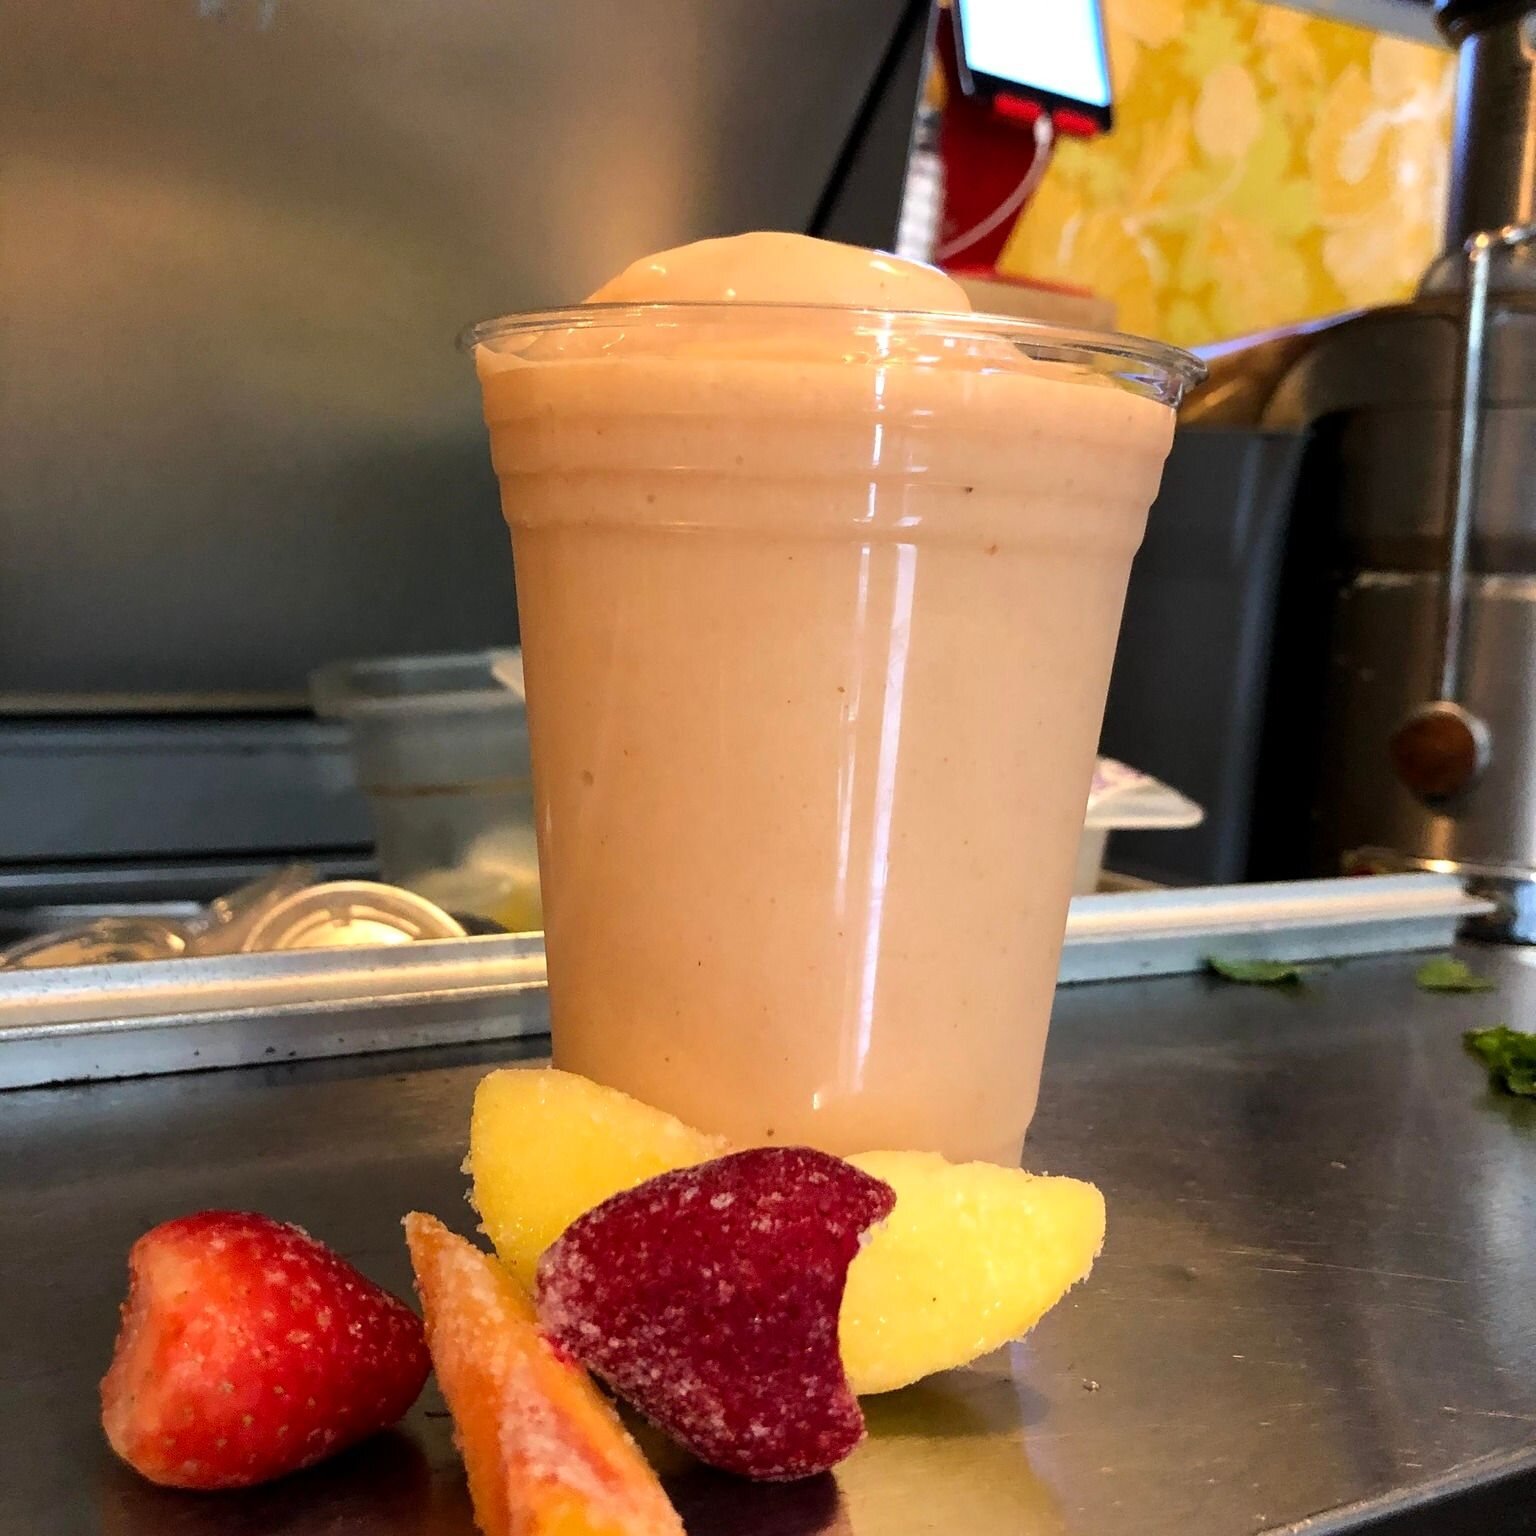 Delicious Pacific Sunset smoothie from our organic &amp; handcrafted range! Get 10% off and keep your healthy happy hour going all weekend long 🍑🍓🥭 strawberries, peaches, mangos! rice milk #wholeFoodsSmoothies #healthyhappyhours #vashonisland #org